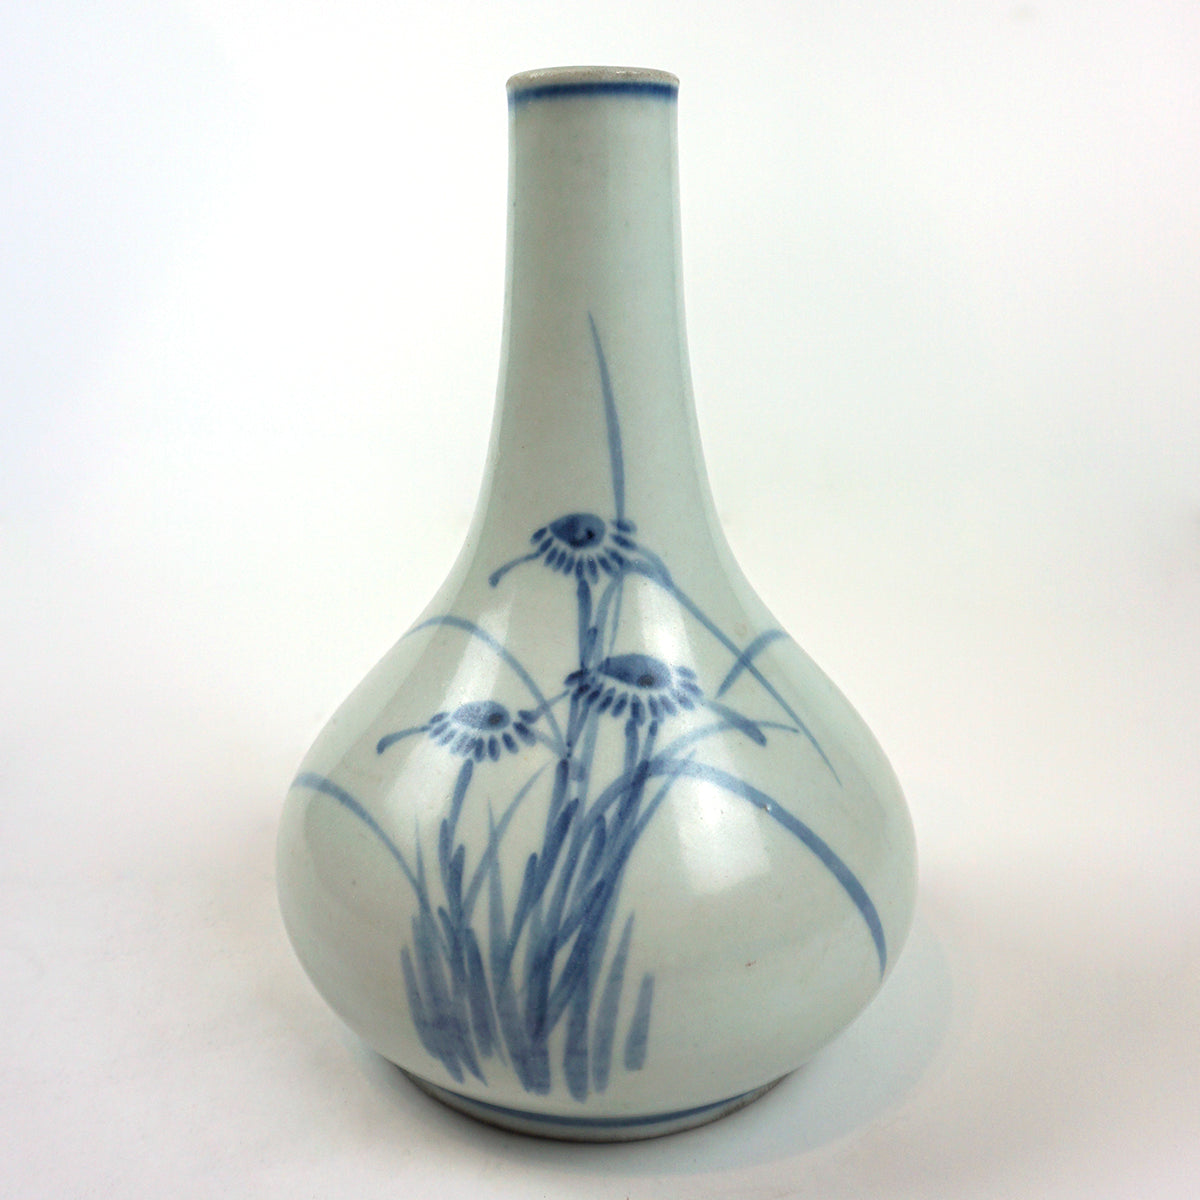 White Porcelain Bottle Vase with Blue Flower Painting from Late Chosun Dynasty by Bunwon Kiln